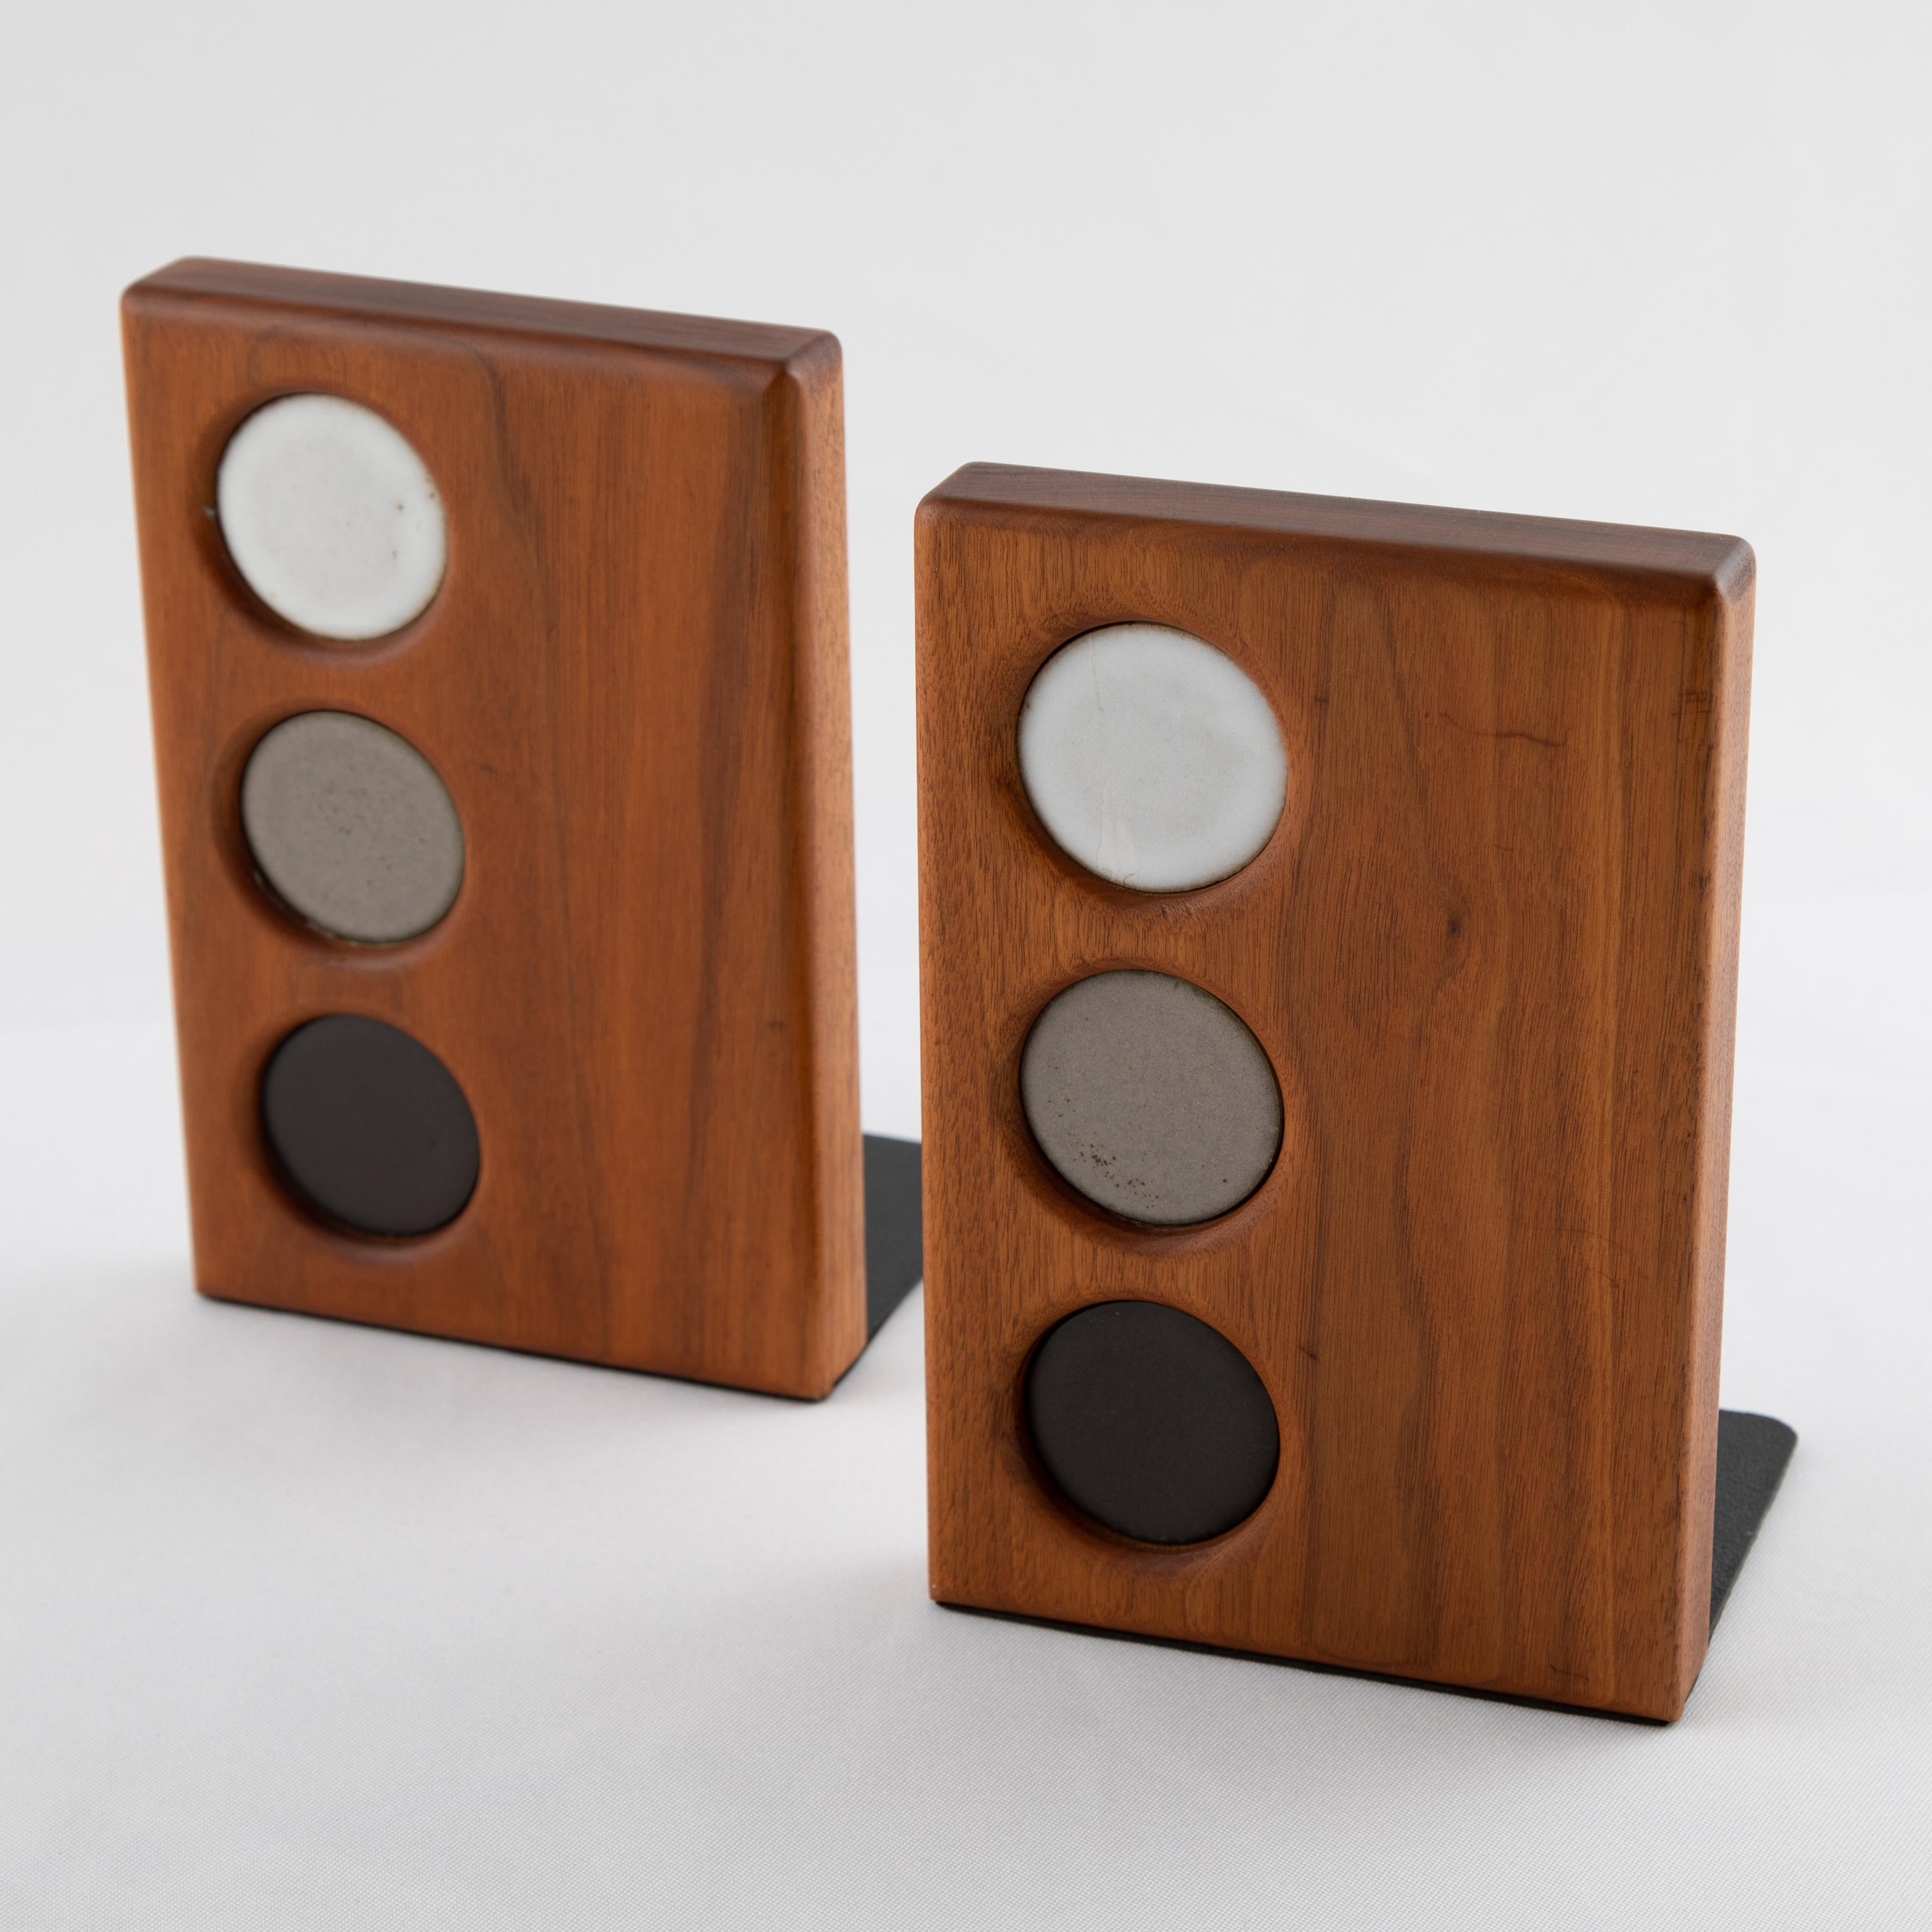 Pair of walnut bookends with inset circular ceramic tiles in white, gray and black, by Jane and Gordon Martz for Marshall Studios. Original Marshall Studios Inc. sticker on base of one bookend.


